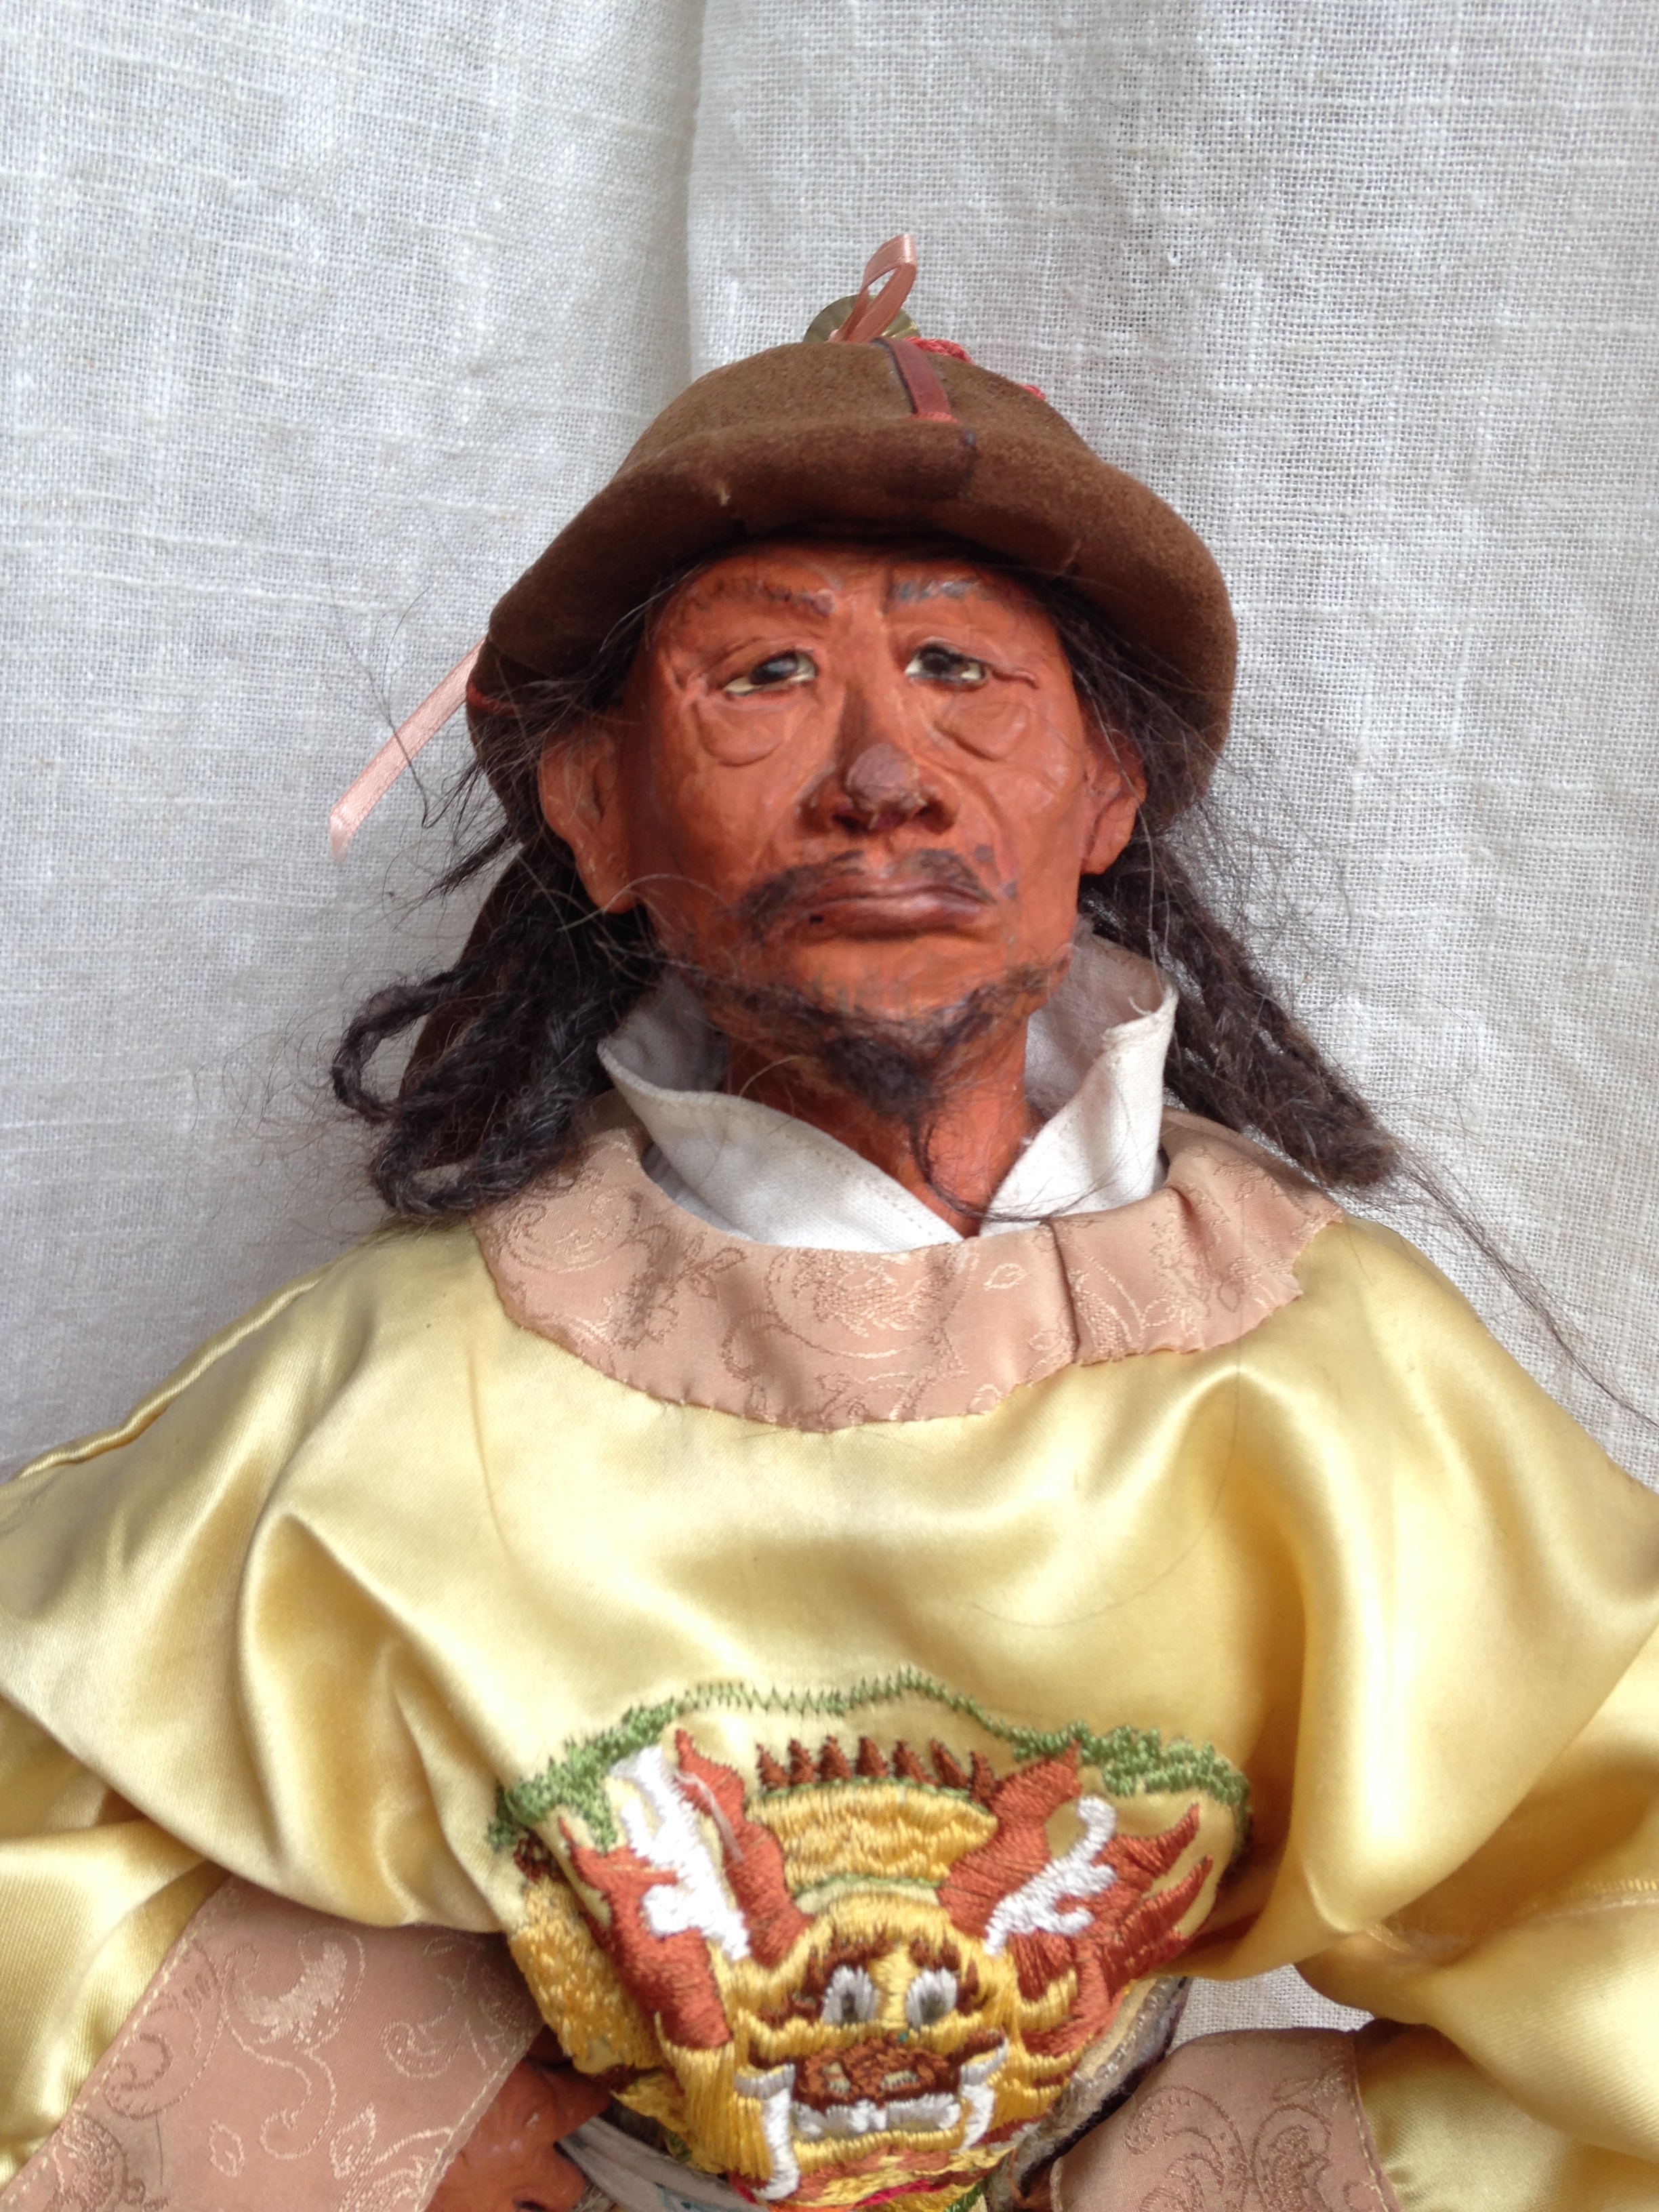 Kublai Kahn costume doll, assignment, clay and fabric, hand and machine embroidery, crafted by Vibeke La. Maltun